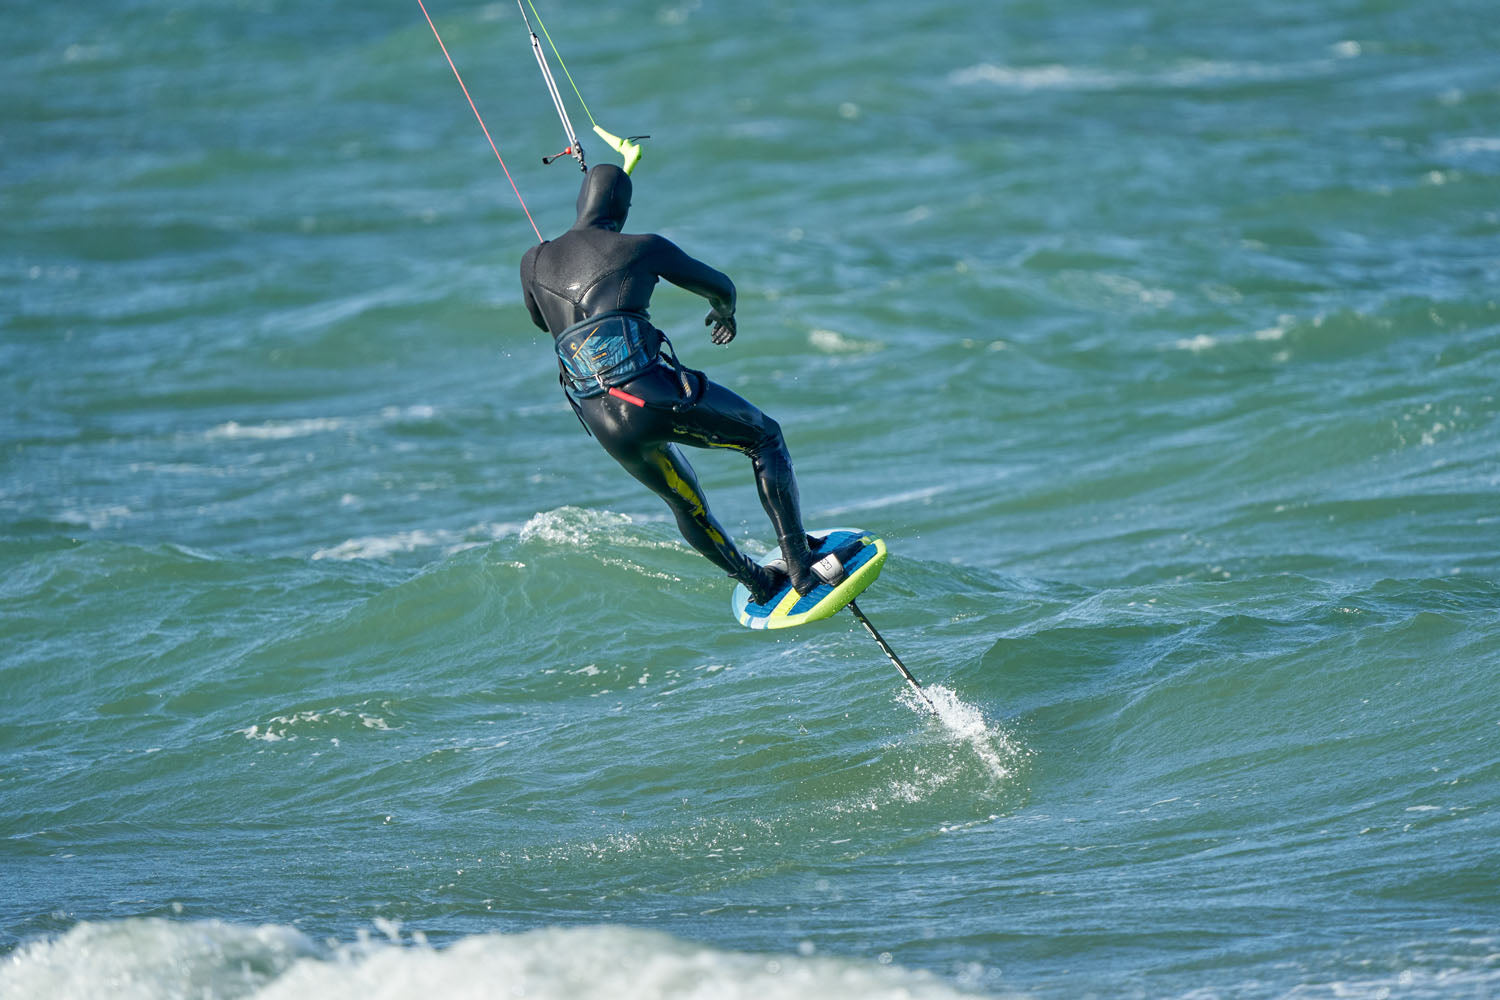 FEEDBACK: FLUID M AND M-S IN KITE FOILING